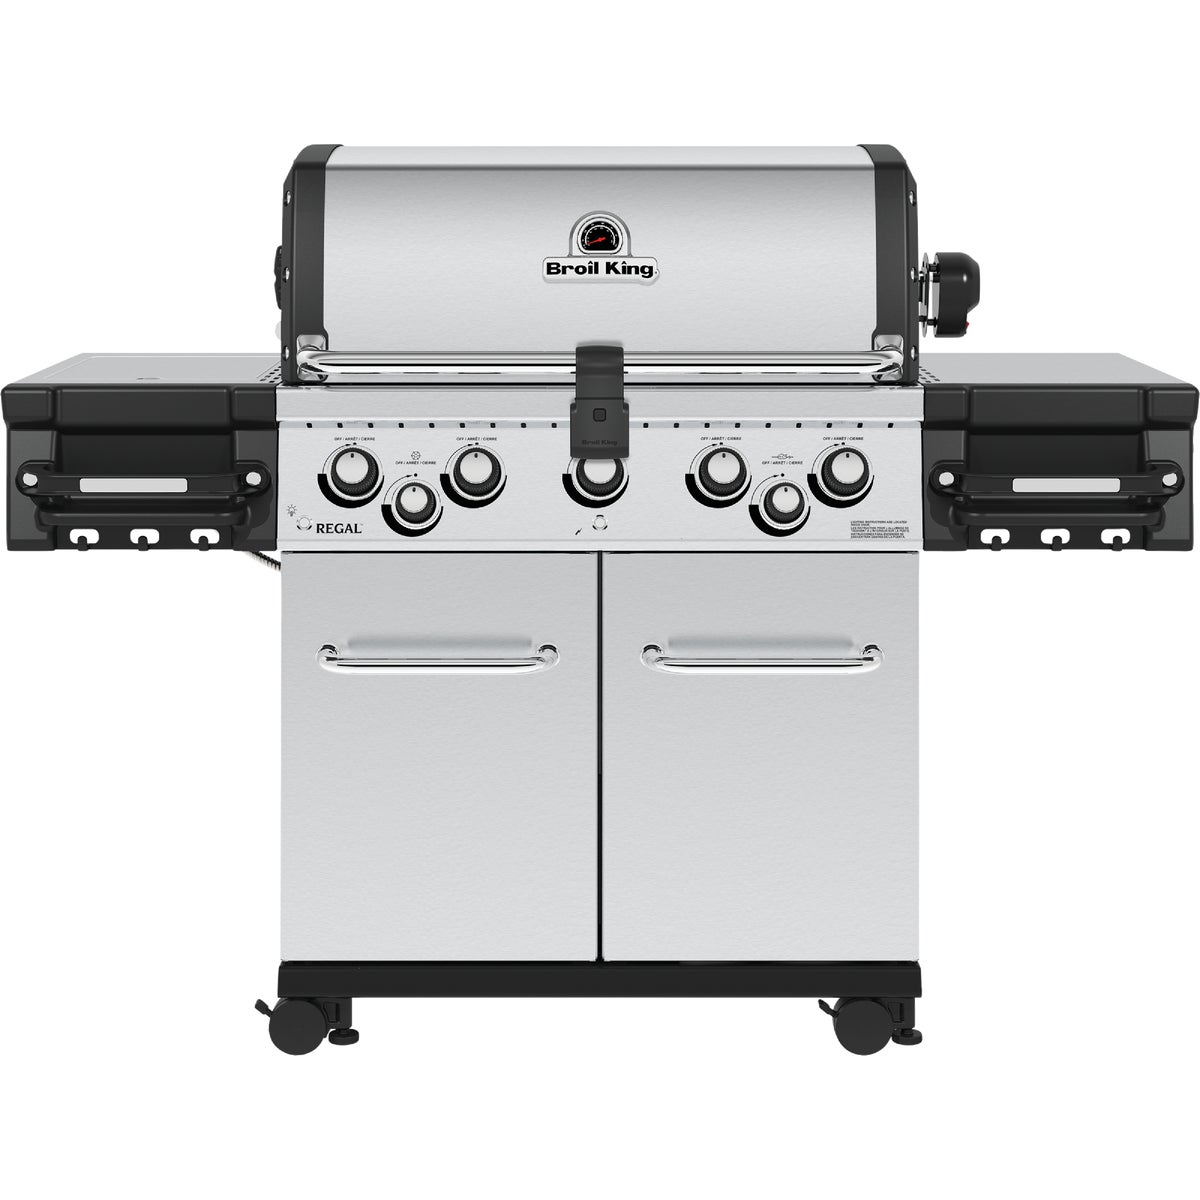 Item 801613, Regal 5-burner gas grill has 625 Sq. In. primary cooking area with 250 Sq.